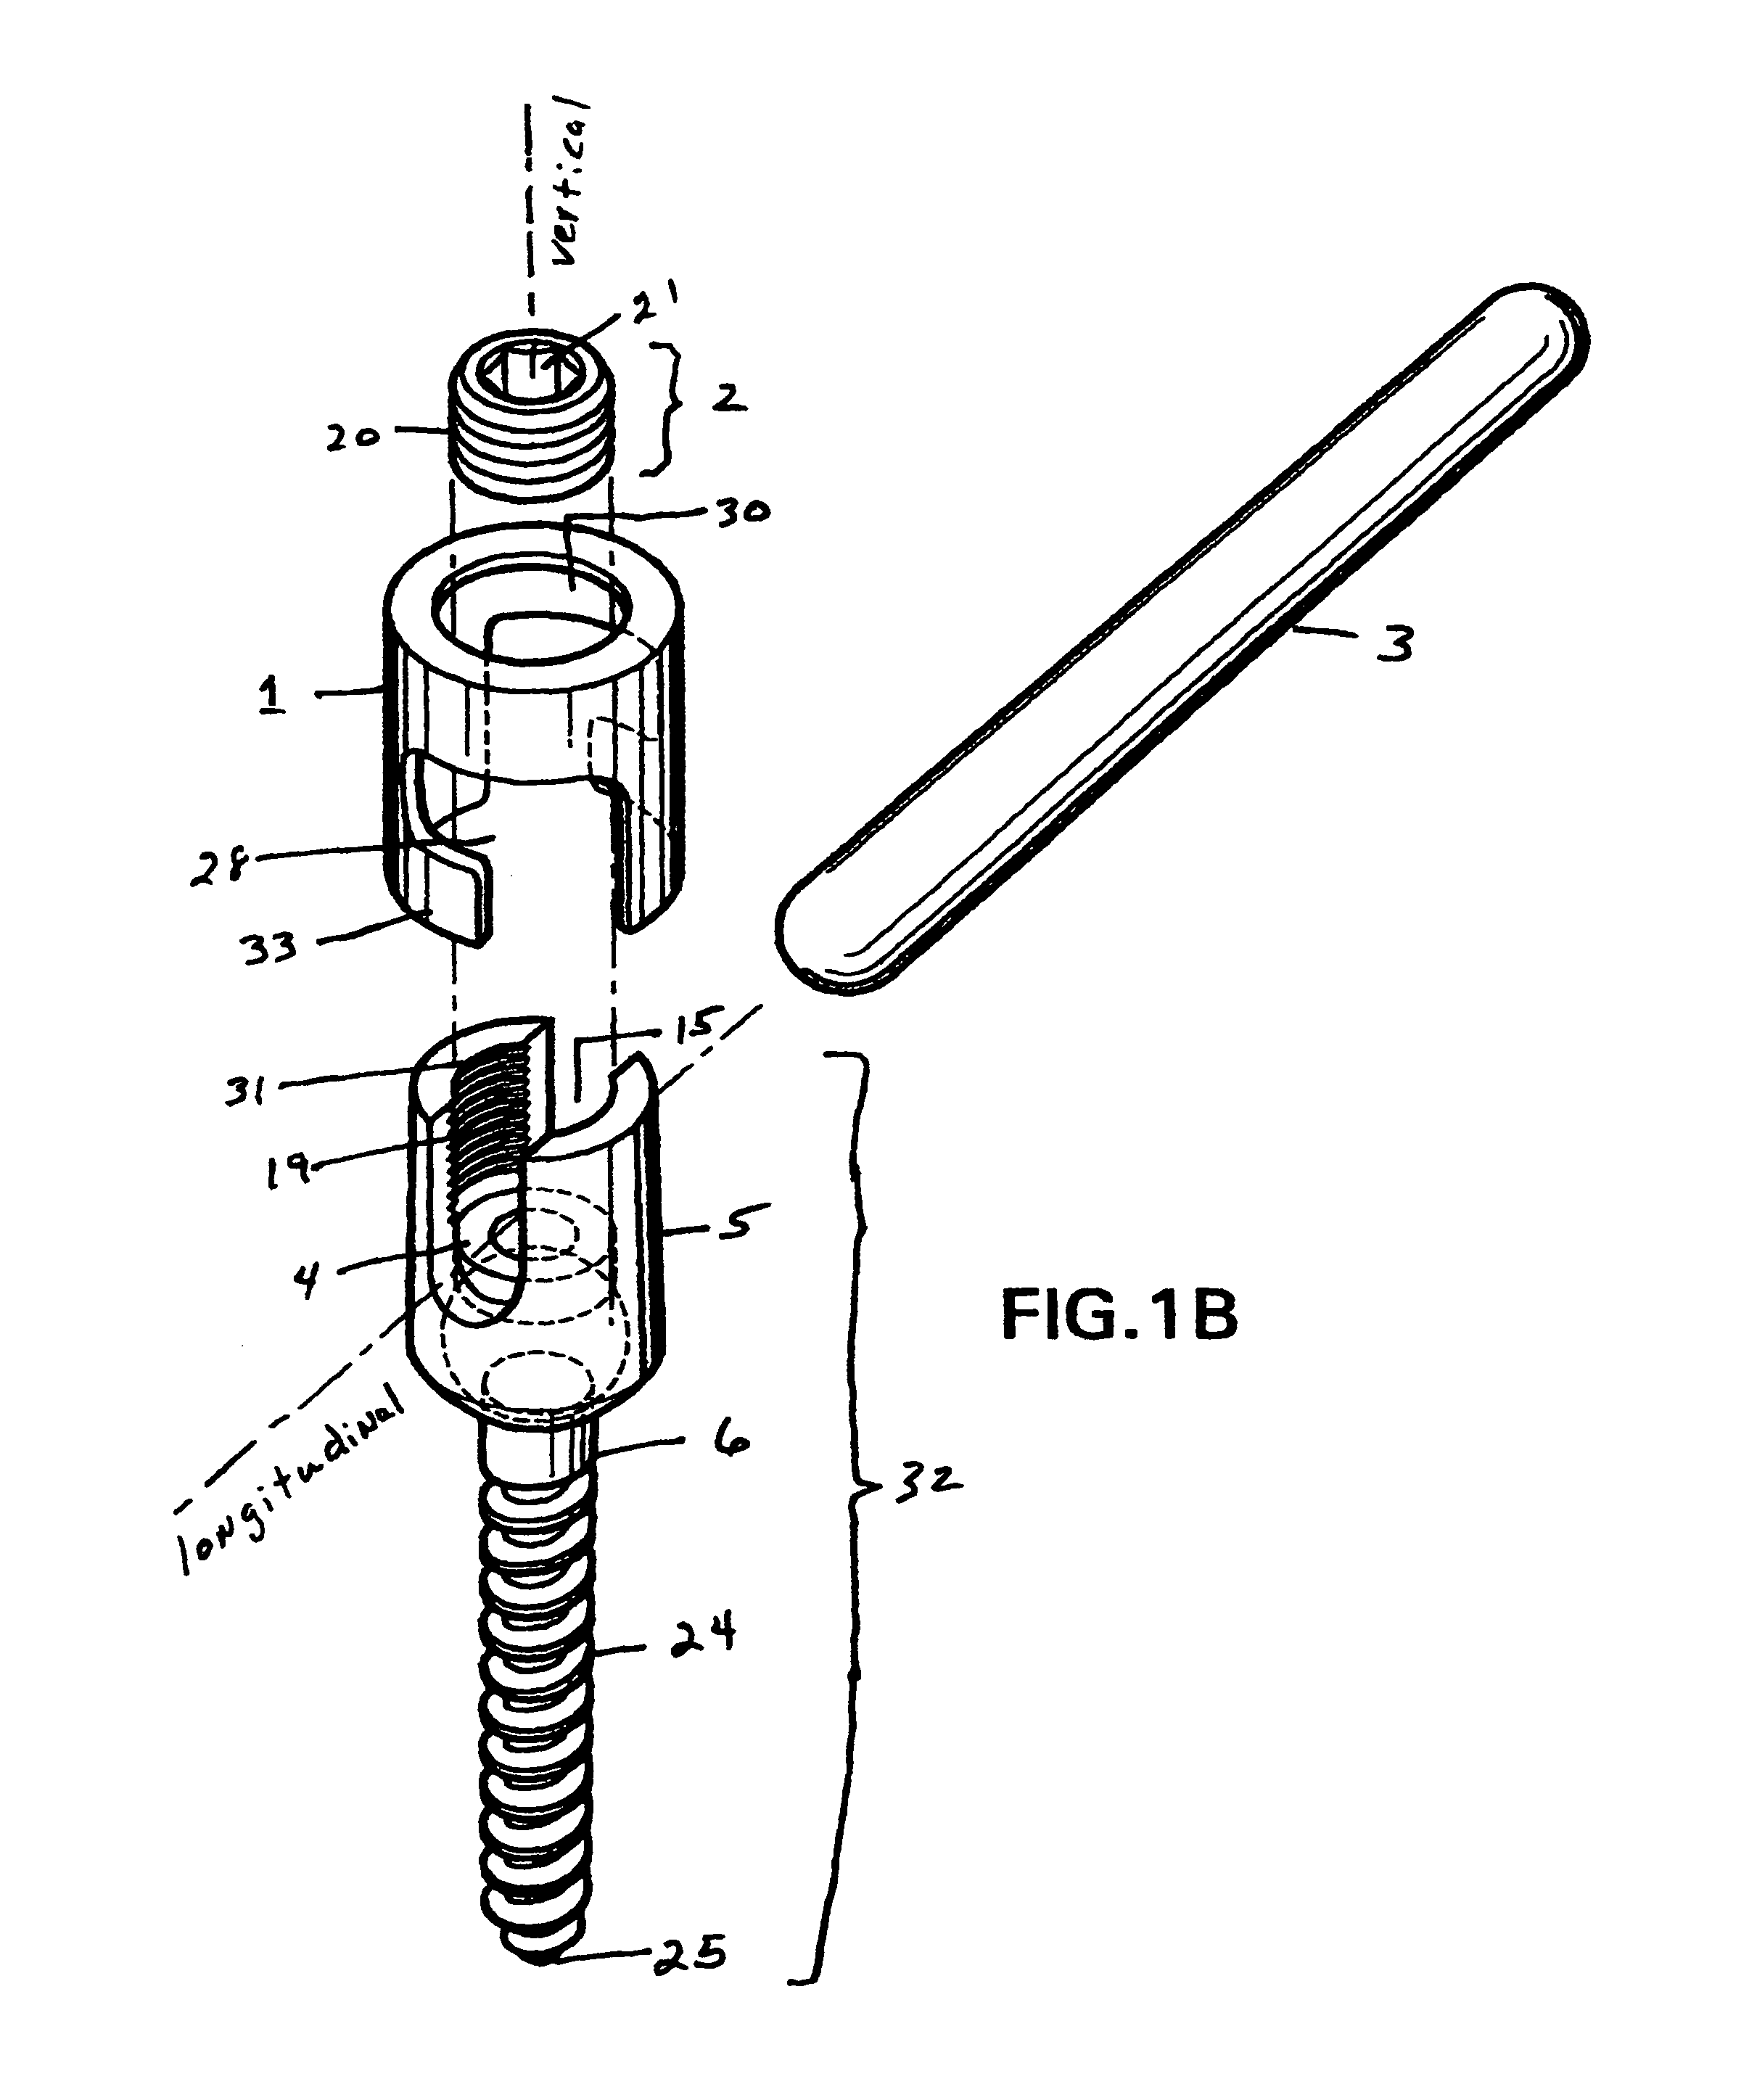 Device for securing spinal rods